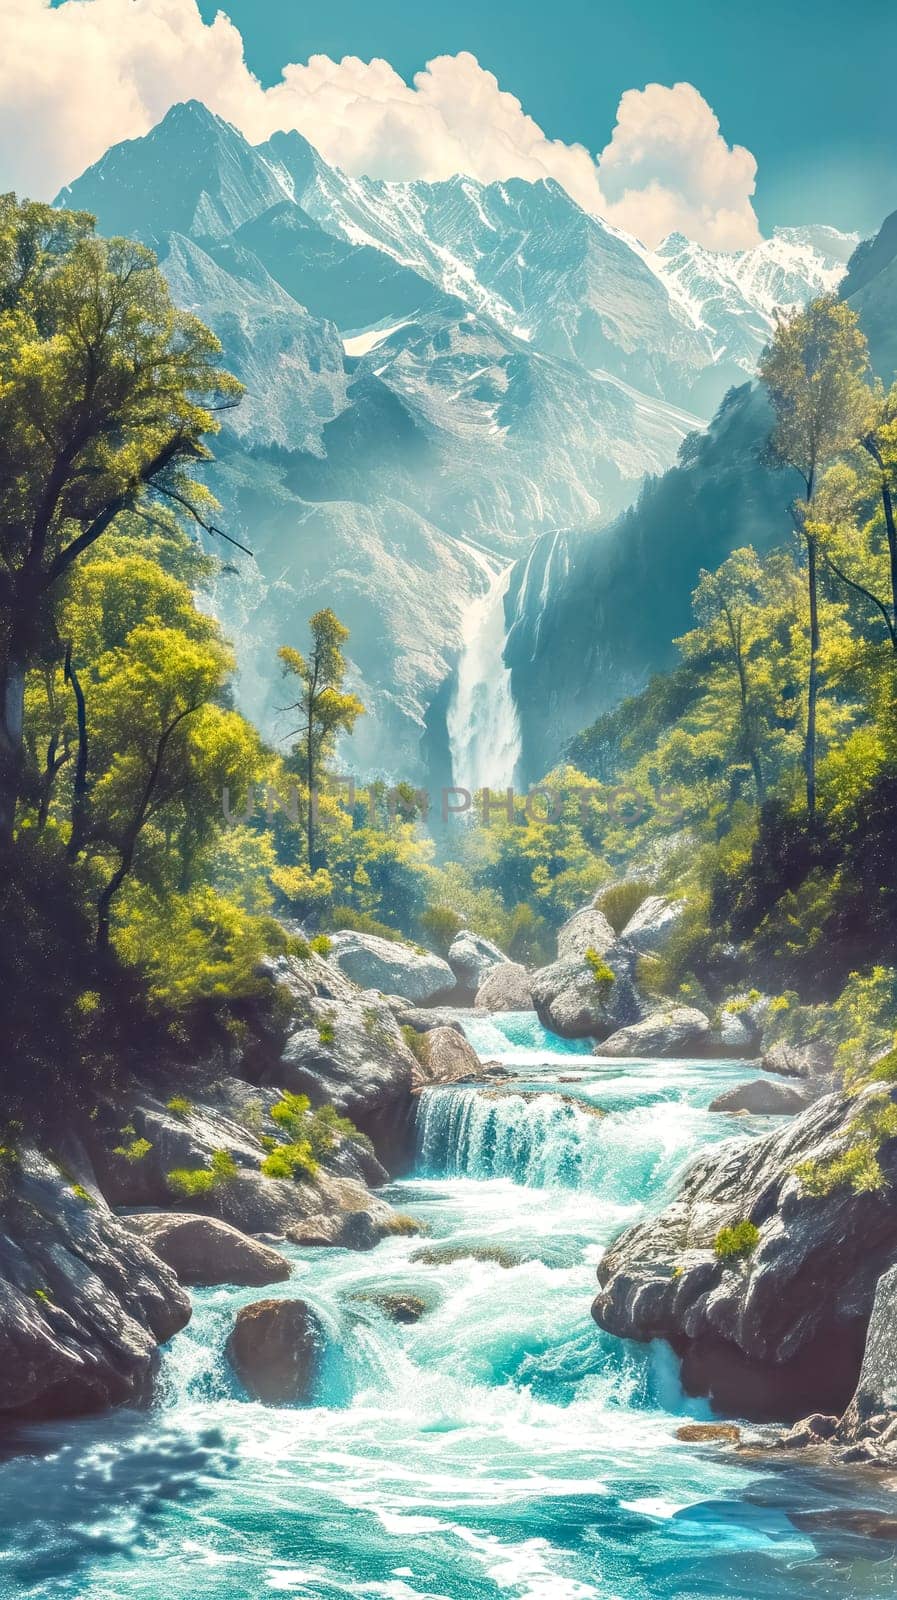 Cascading waterfall flowing through a mountainous landscape, flanked by vibrant flora under a sunlit sky, vertical